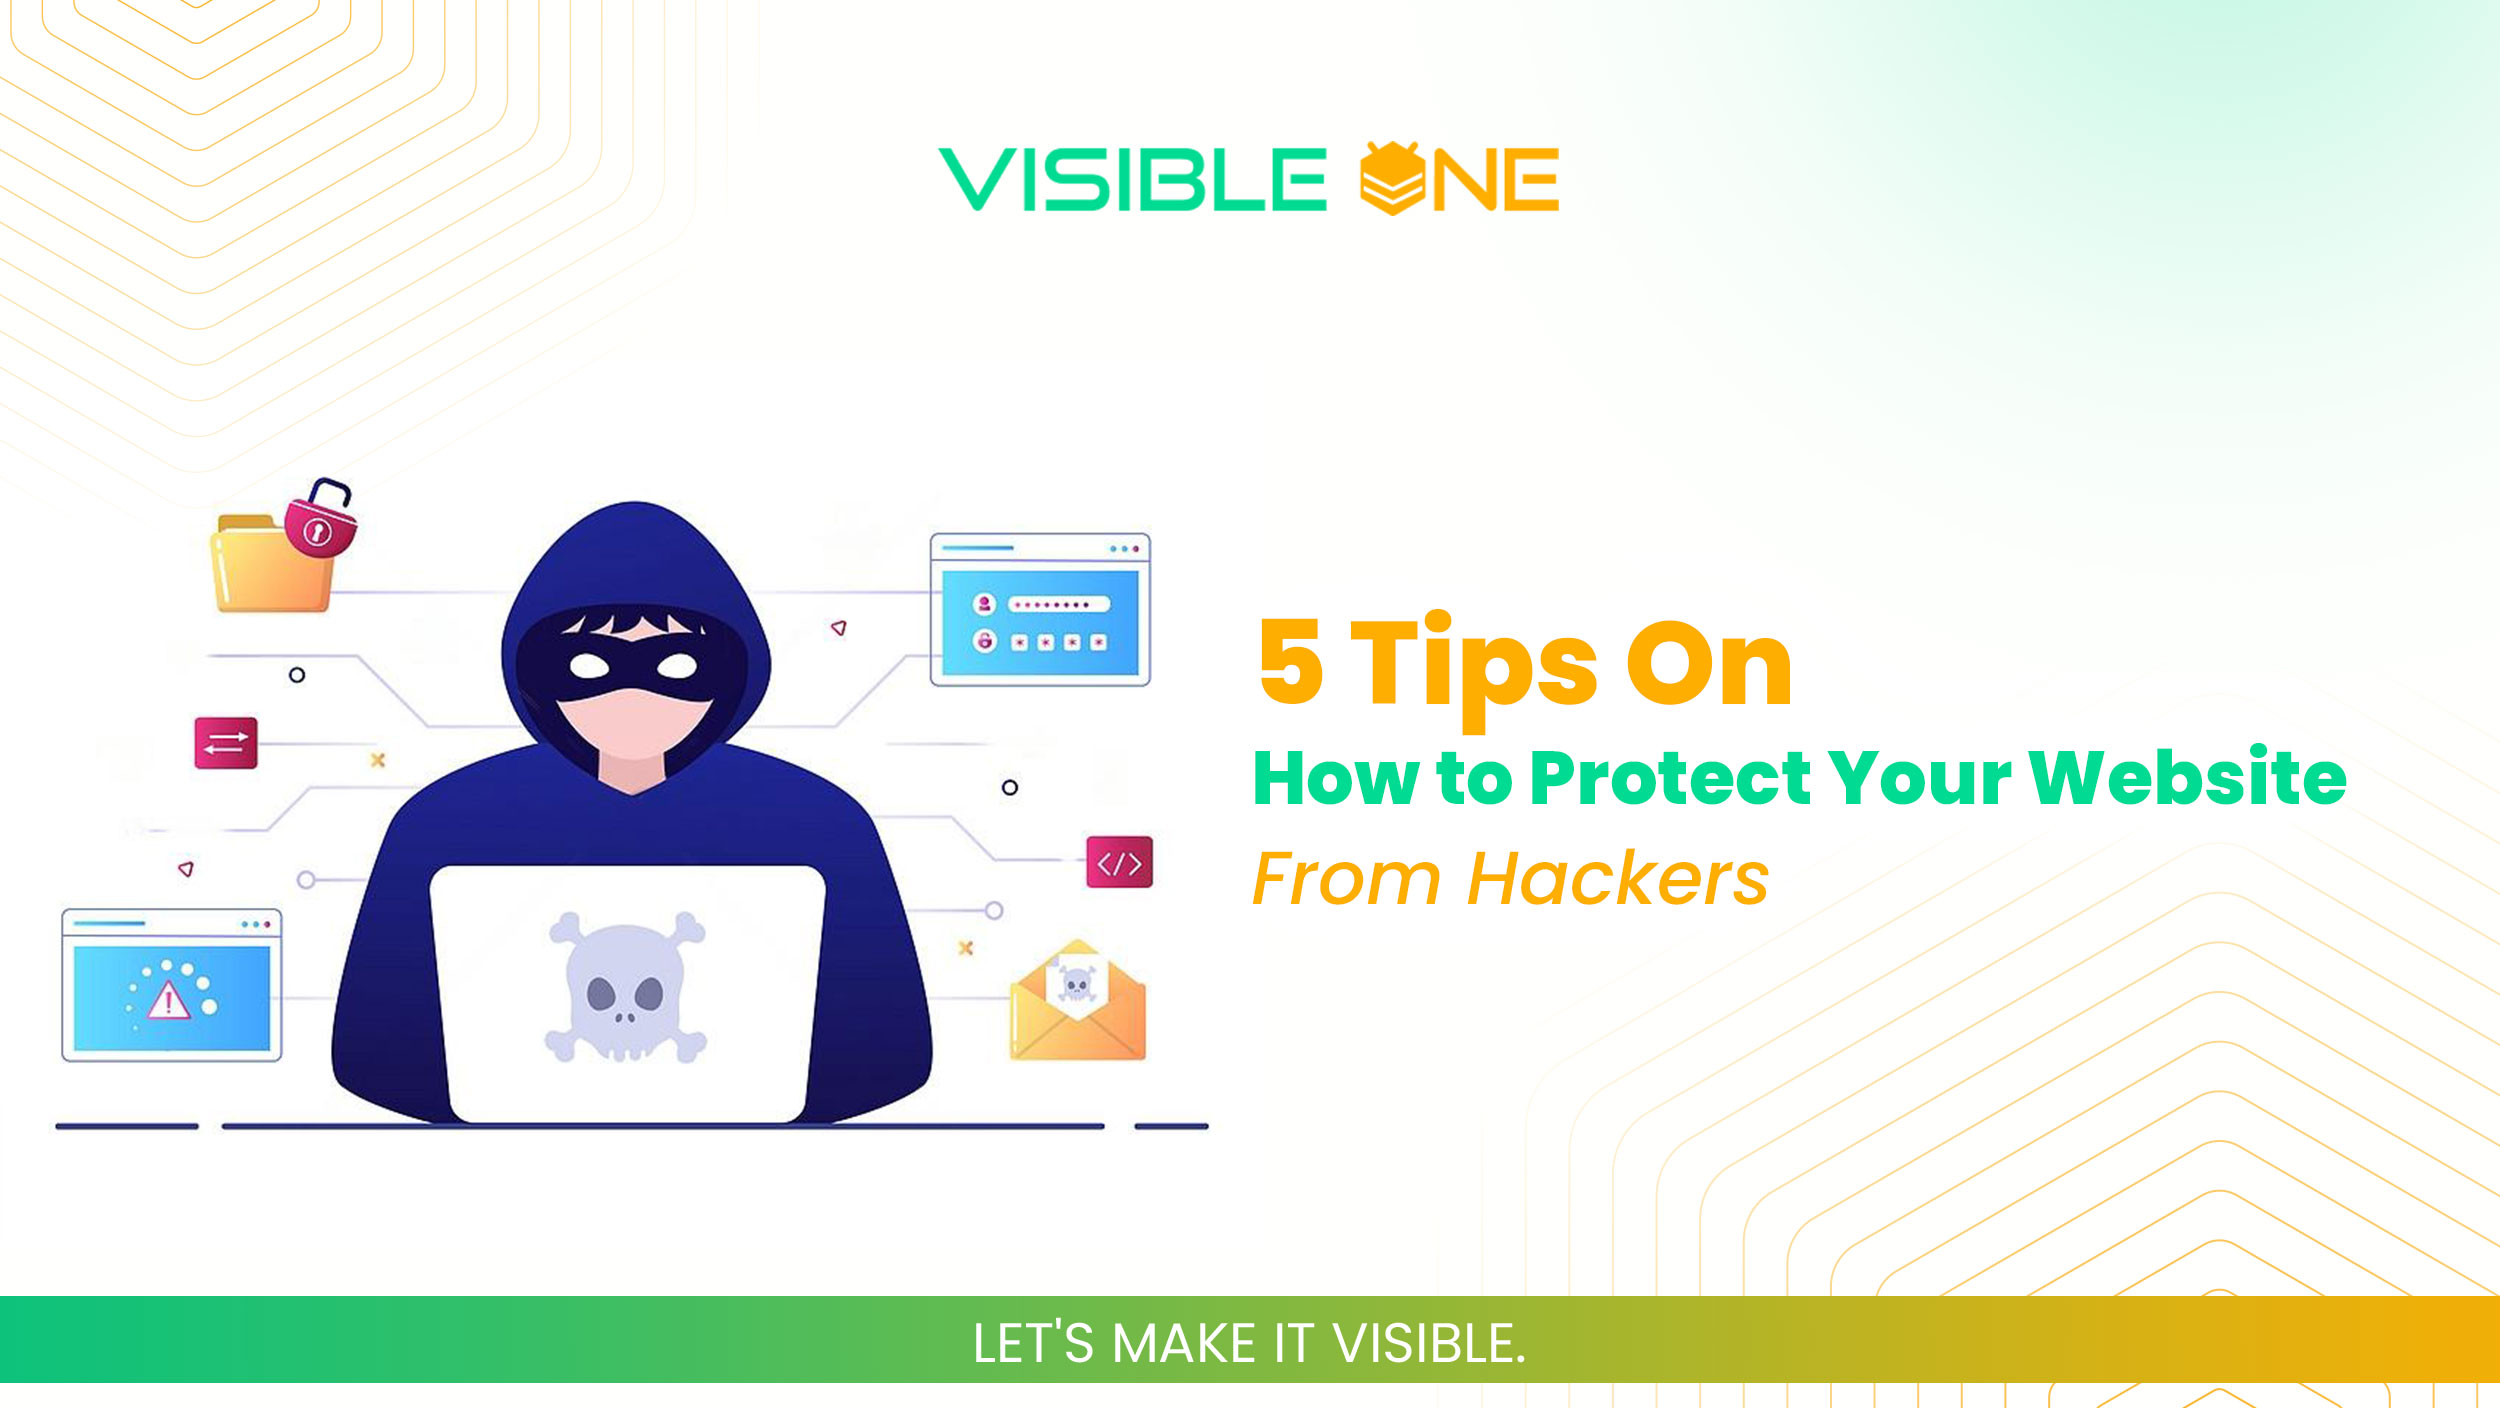 5 Tips On How to Protect Your Website From Hackers